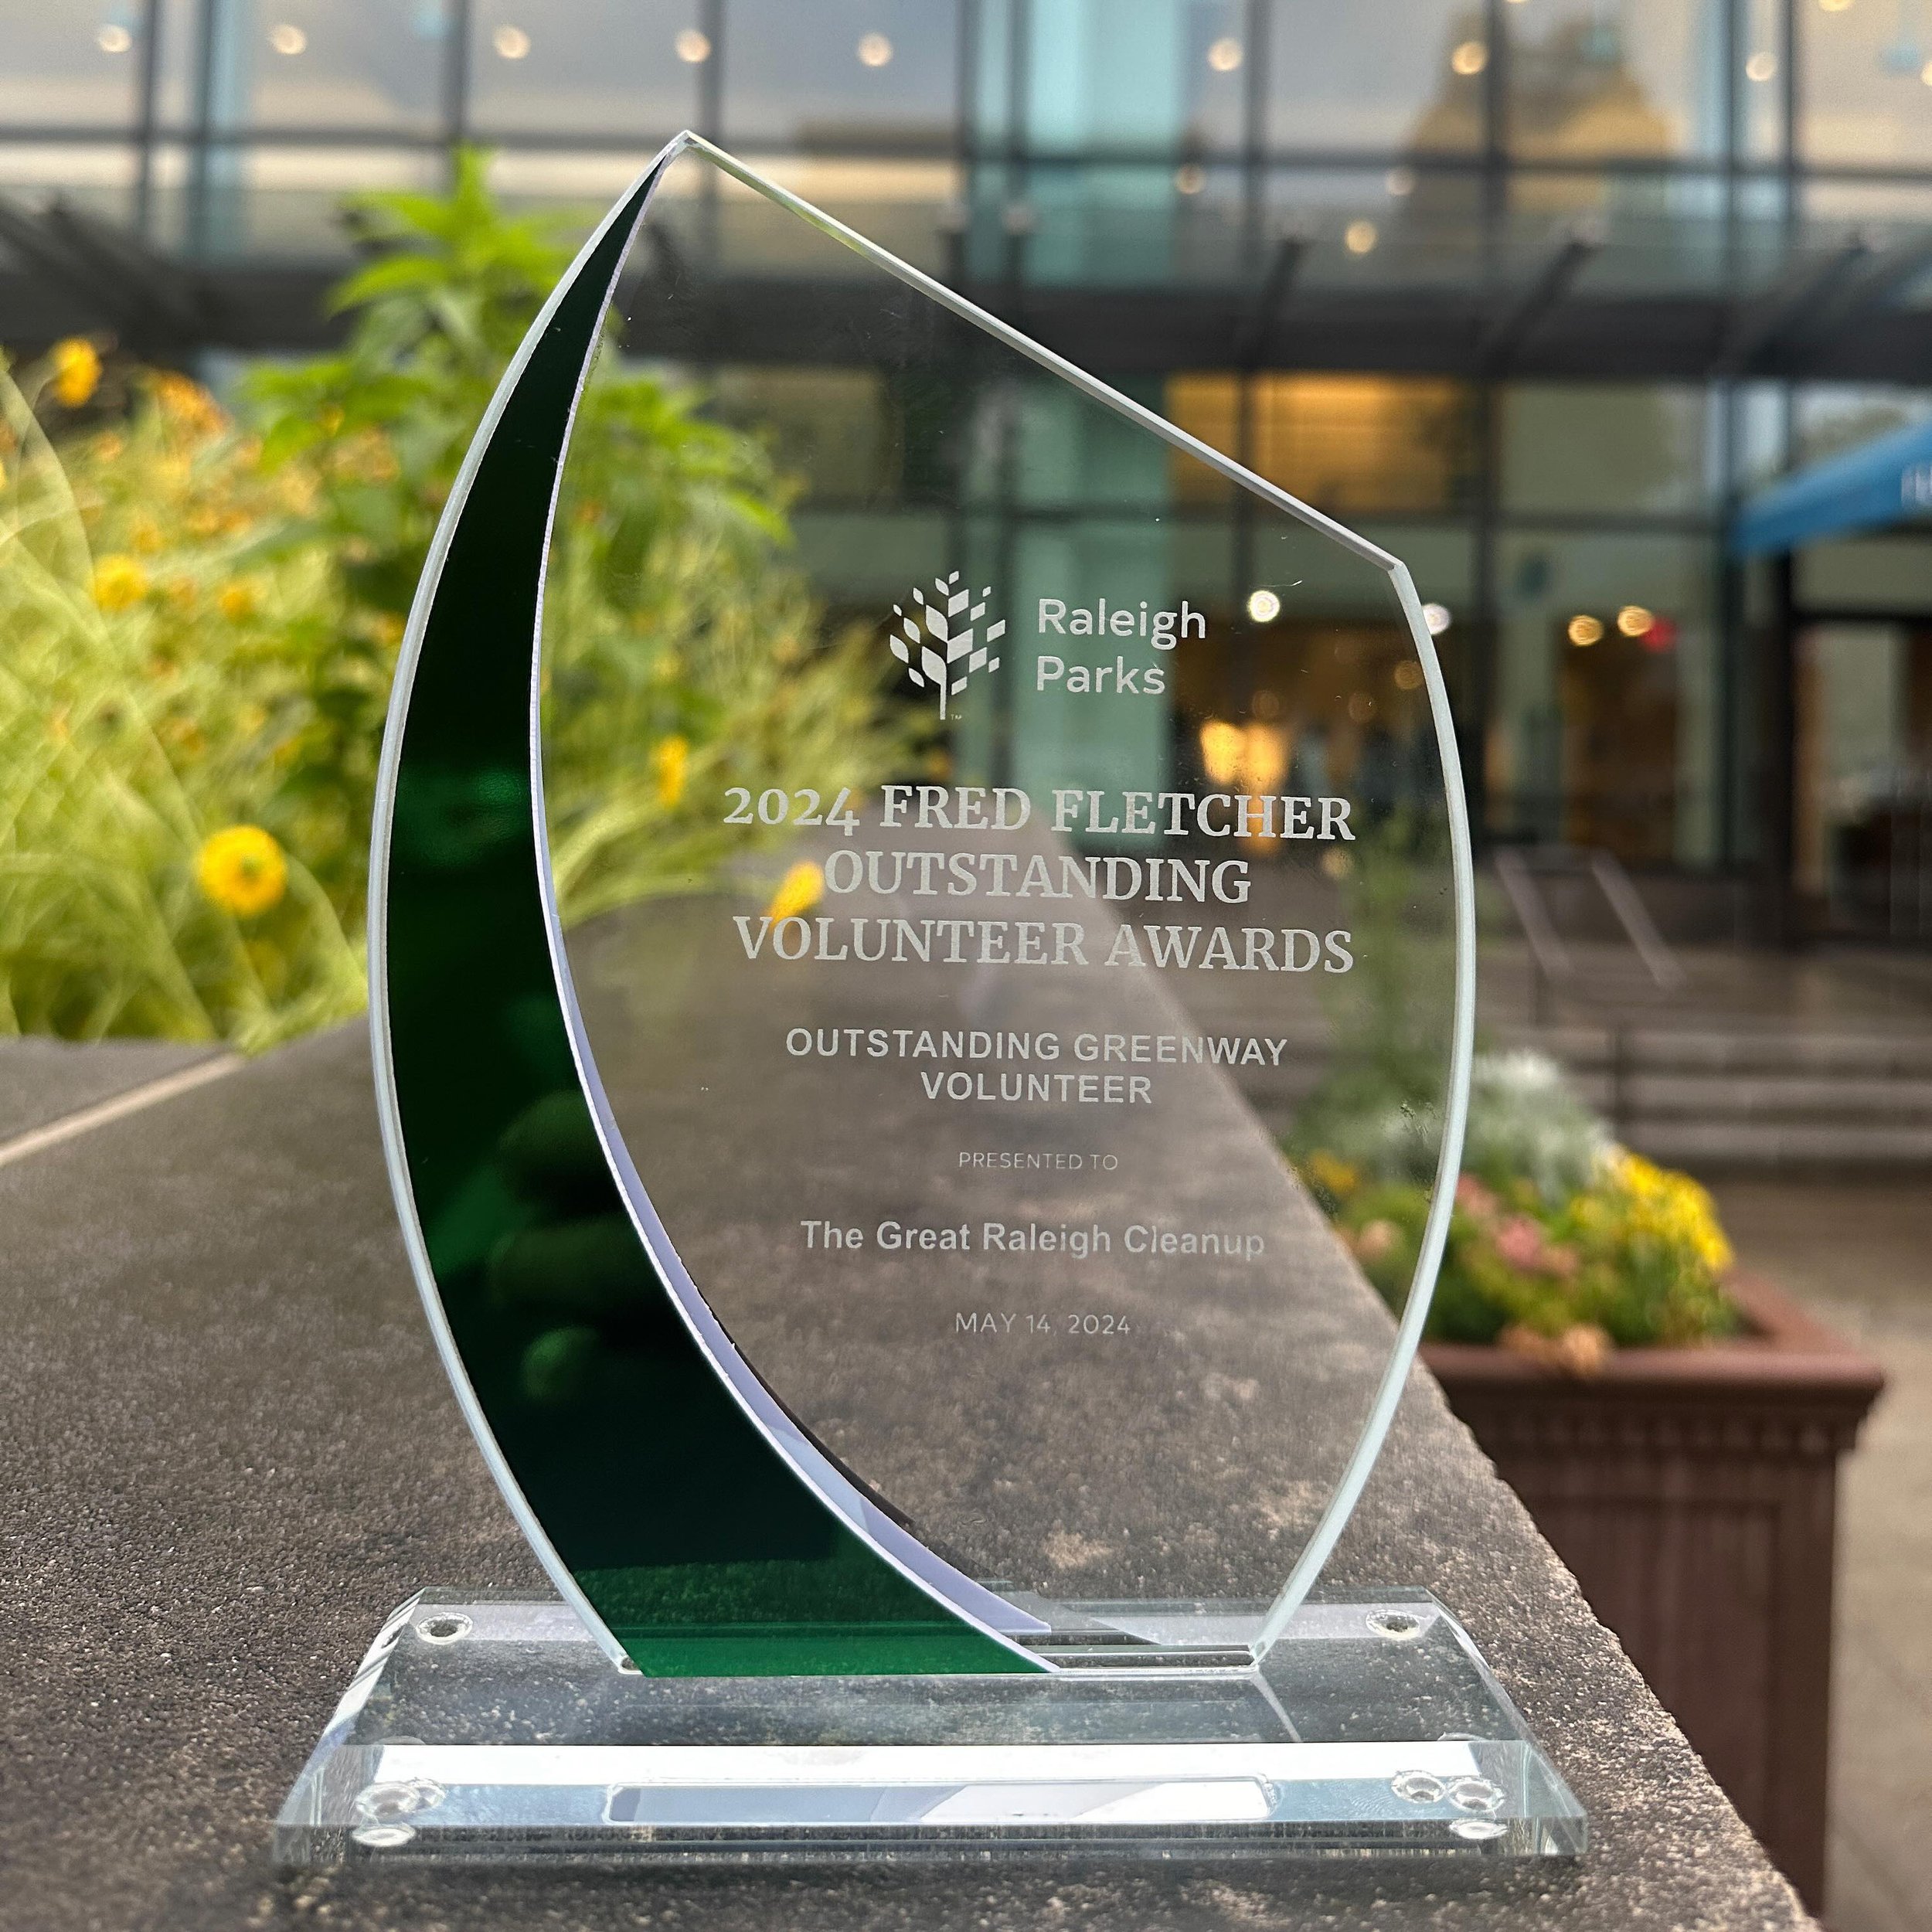 This week we received the Fred Fletcher Outstanding Volunteer Award as the 2024 Outstanding Greenway Volunteer. We are incredibly honored to receive the award and are appreciative of the partnership we have with the City of Raleigh&rsquo;s Parks, Rec